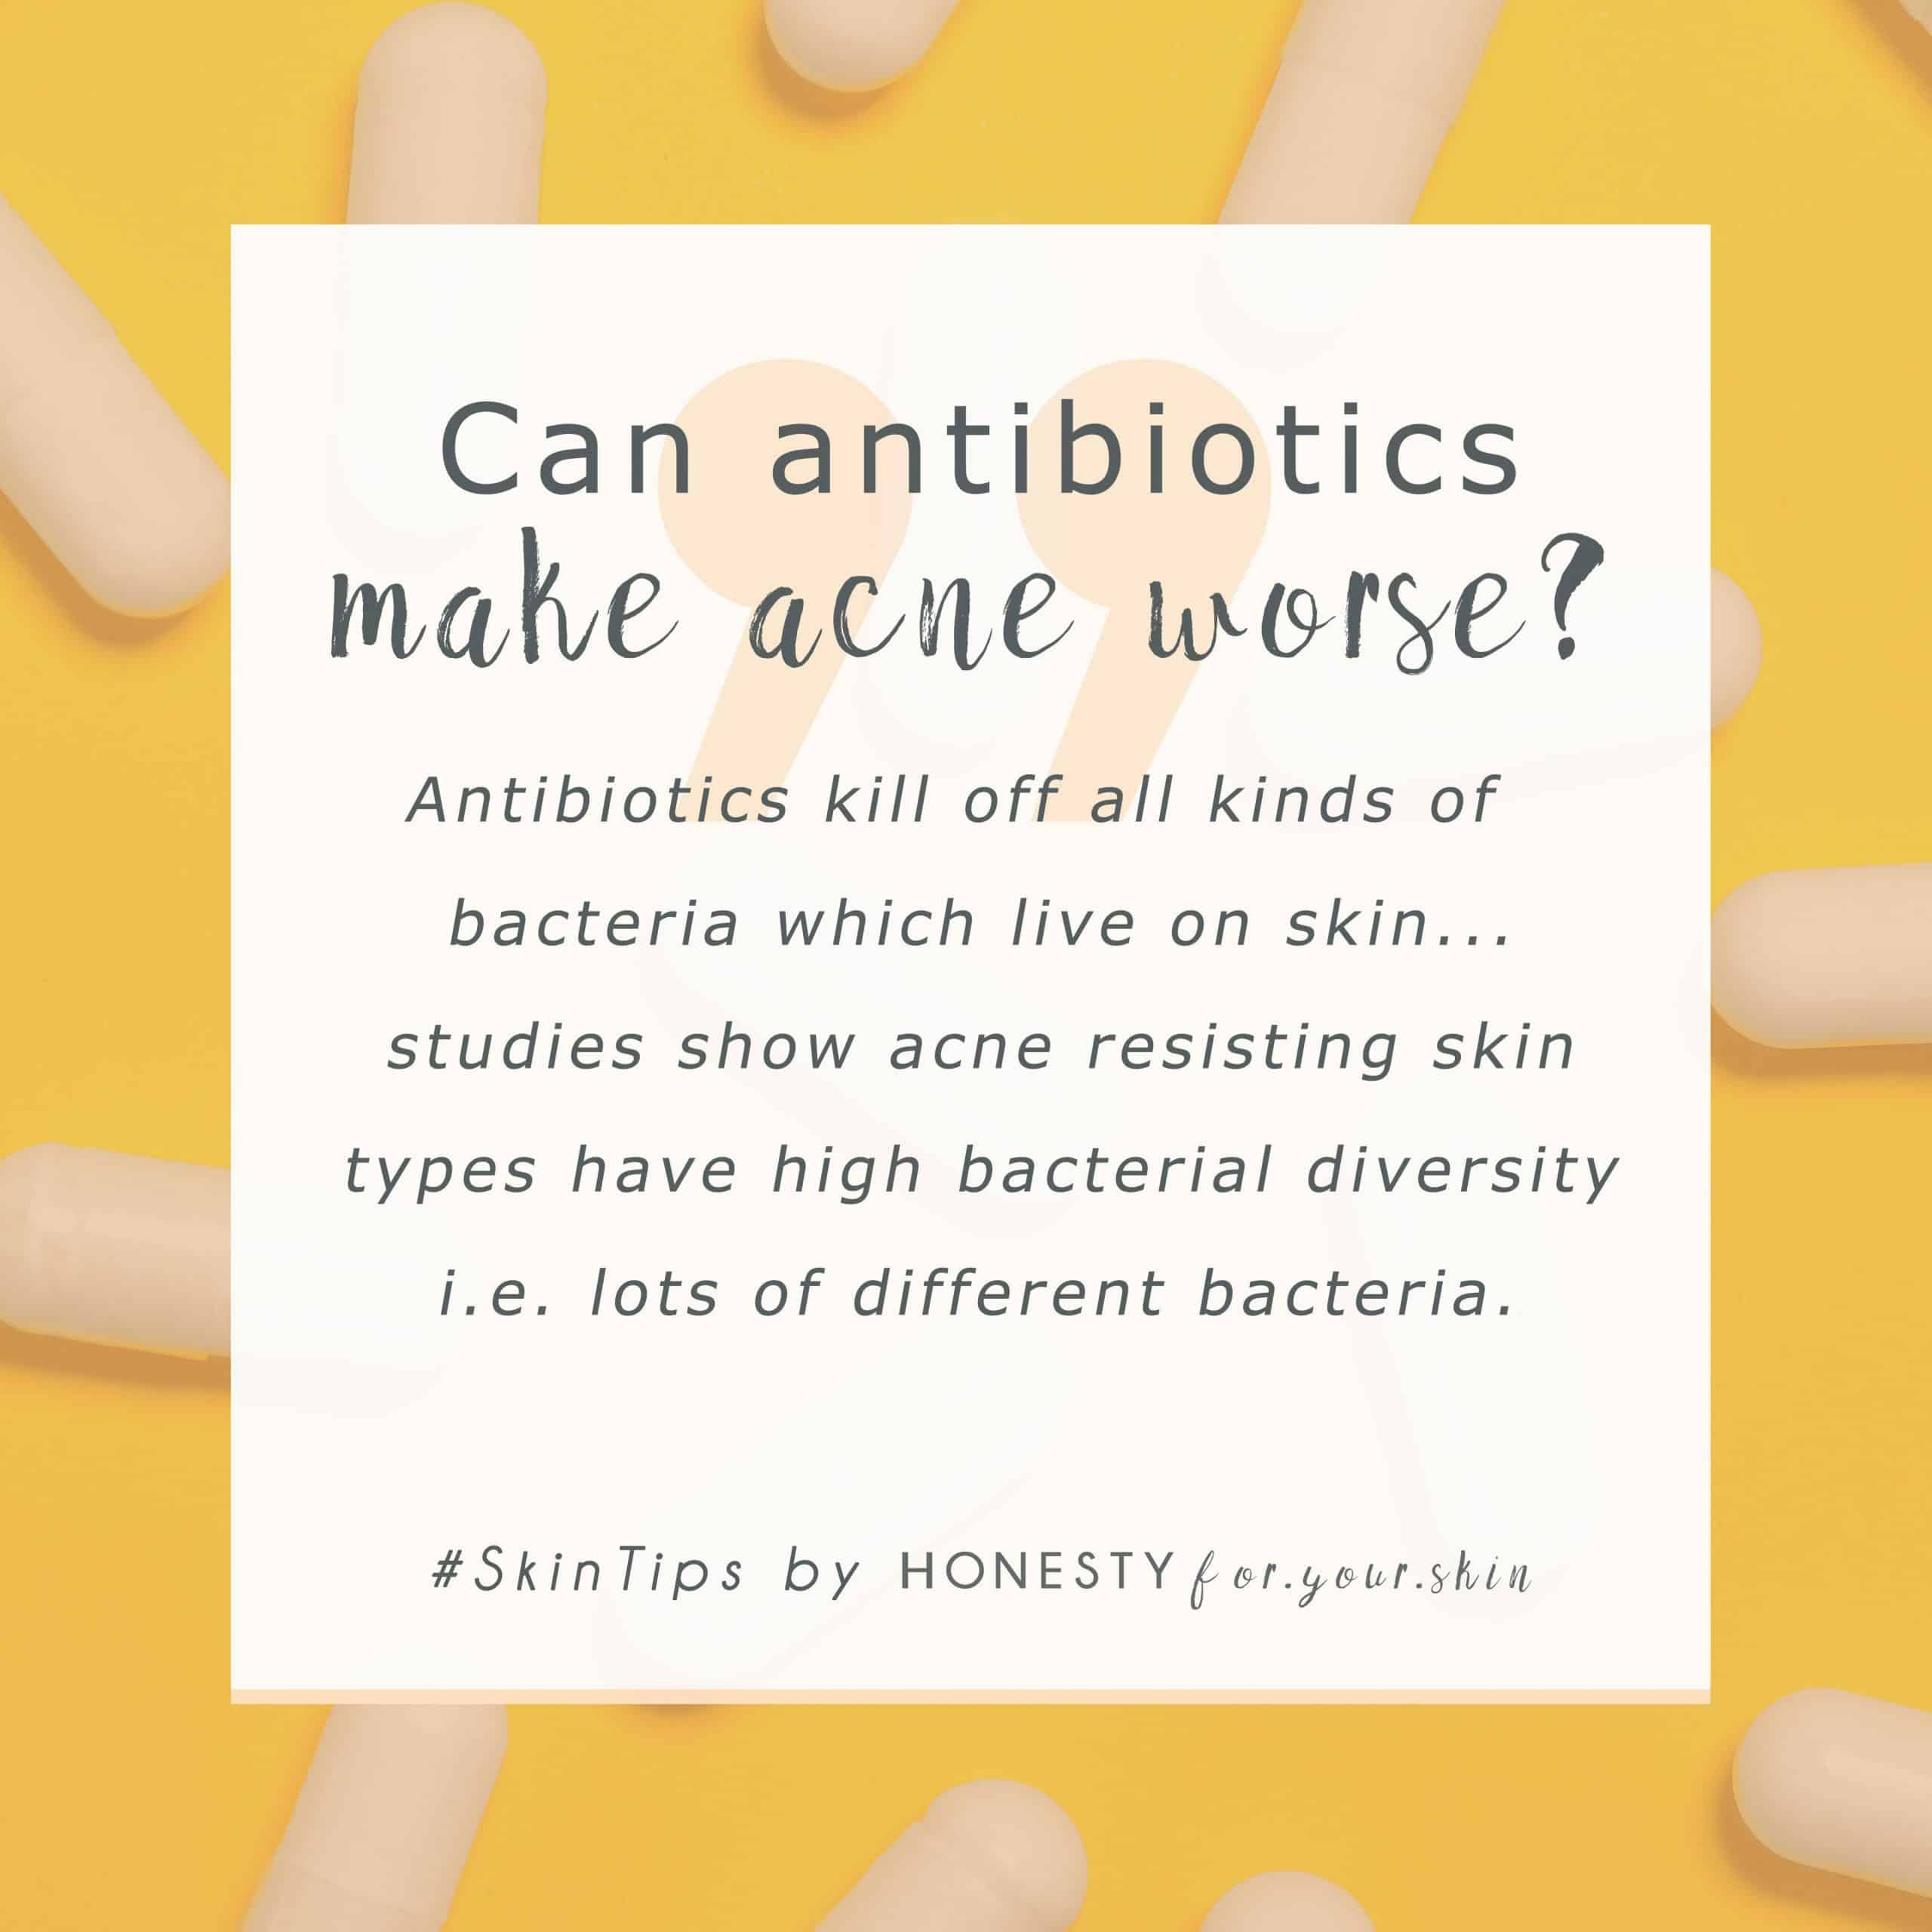 Do Antibiotics Help Acne? Or Will They Make Your Acne Worse?